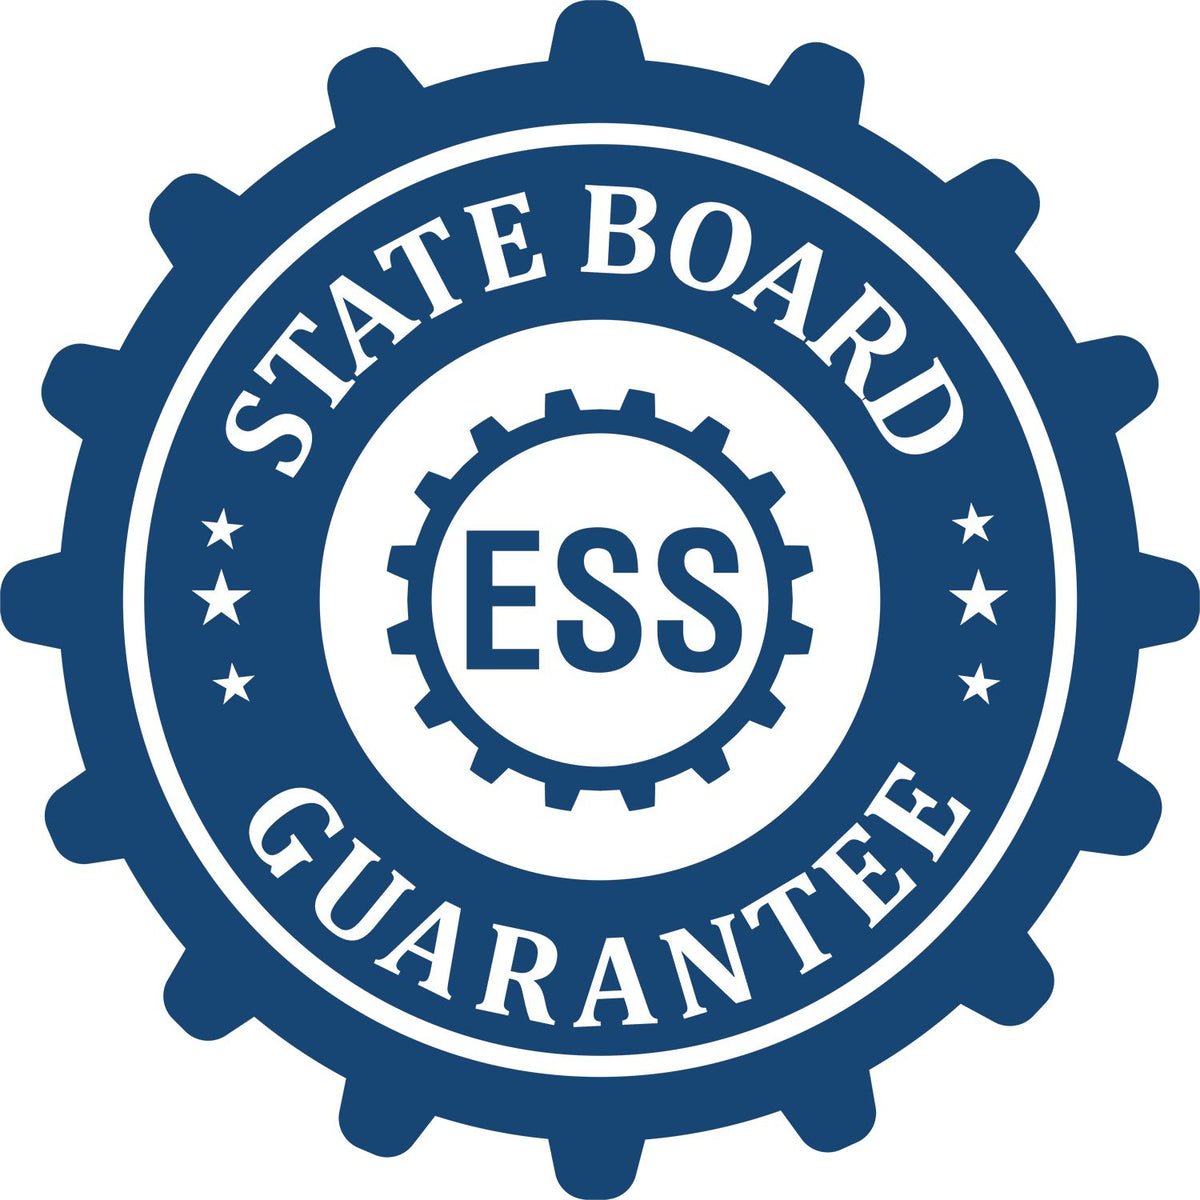 An emblem in a gear shape illustrating a state board guarantee for the Soft Maine Professional Engineer Seal product.